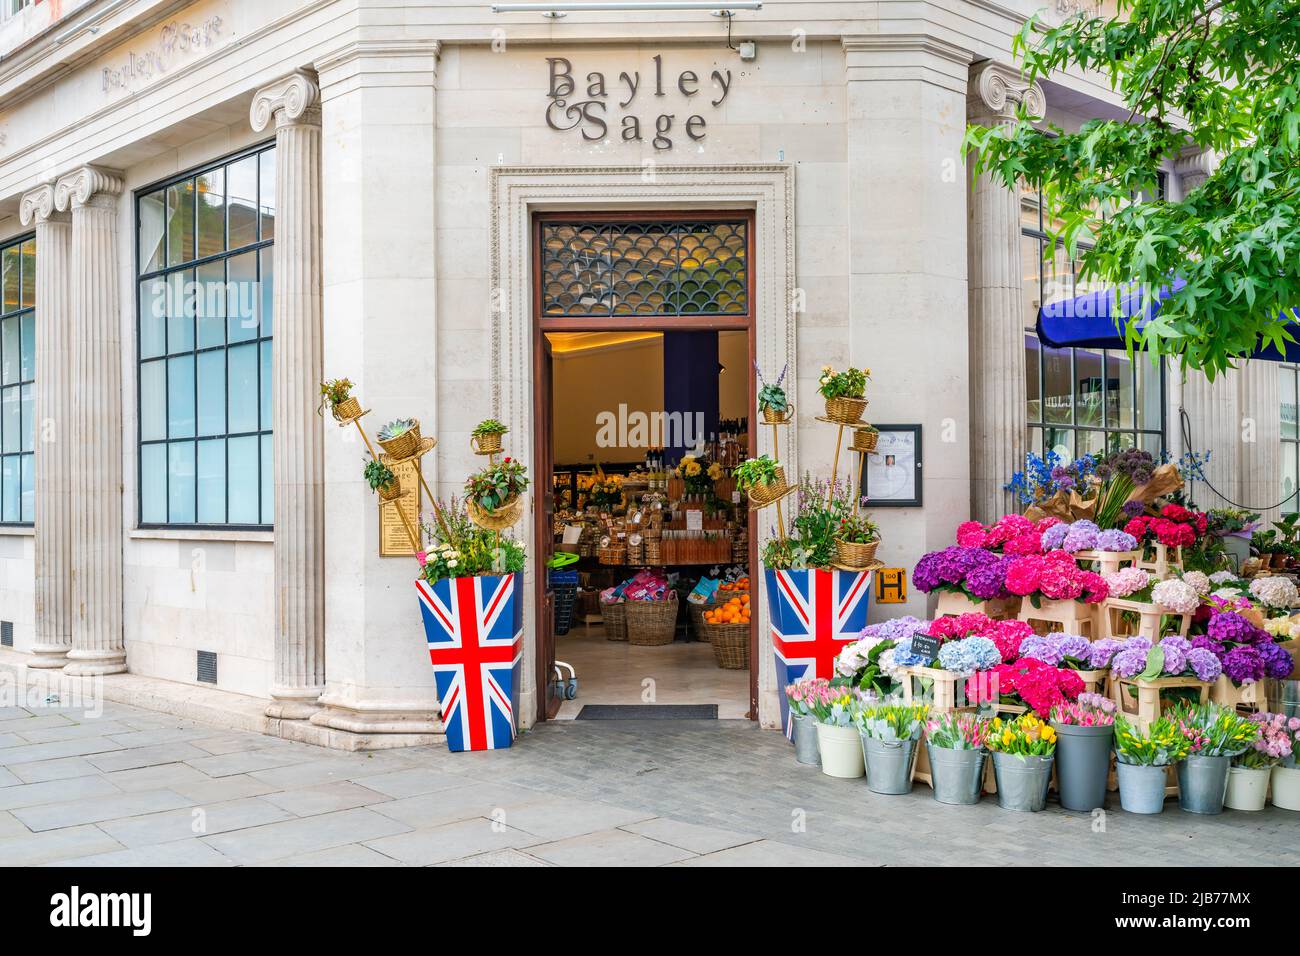 LONDON, UK - JUNE 03, 2022: Bayley and Sage shop first opened in Belgravia in February 2021 and offers excellent choice of quality fresh produce Stock Photo